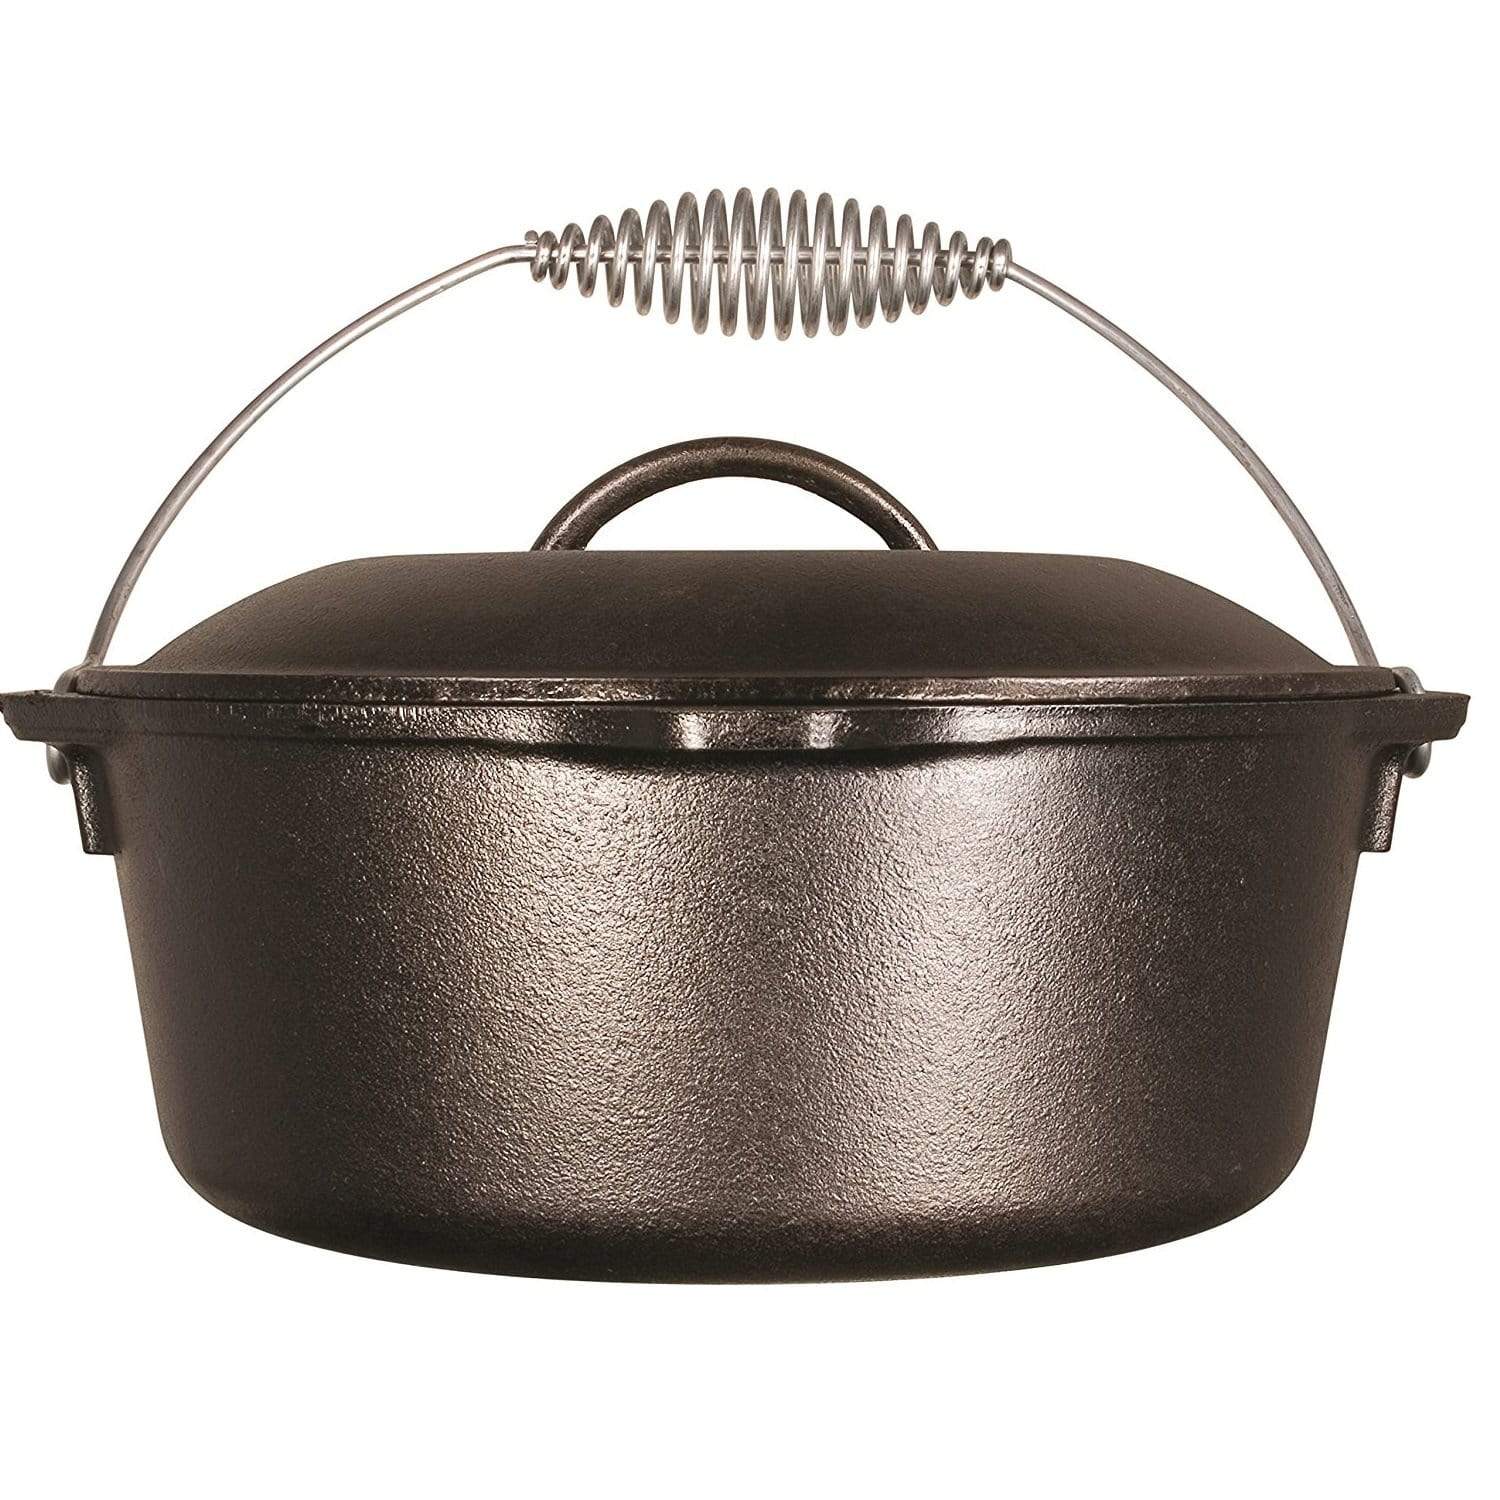 Lodge 5-Piece Pre-Seasoned Cast Iron Cookware Set - Includes 8 and 10 1/4  Skillets, 10 1/2 Griddle, and 5 Qt. Dutch Oven